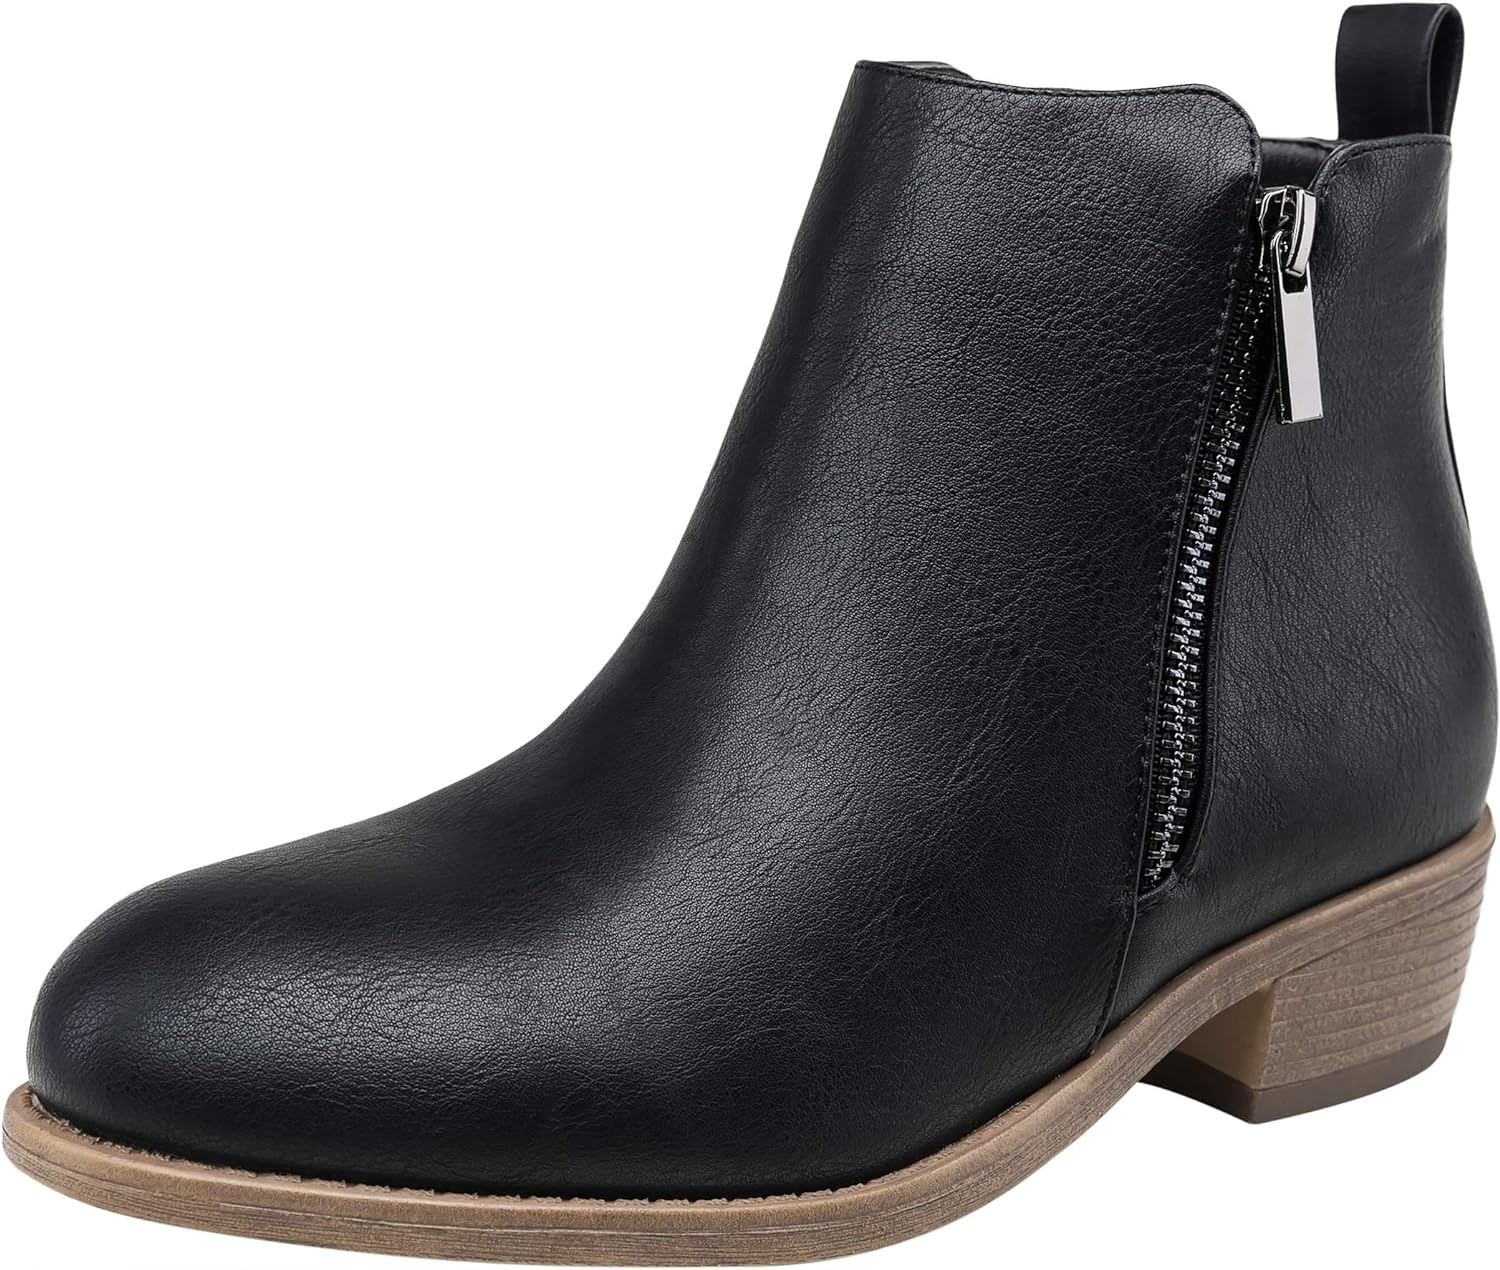 Time-Sensitive Deal: Jeossy Women's Ankle Boots - 31.00% Off!